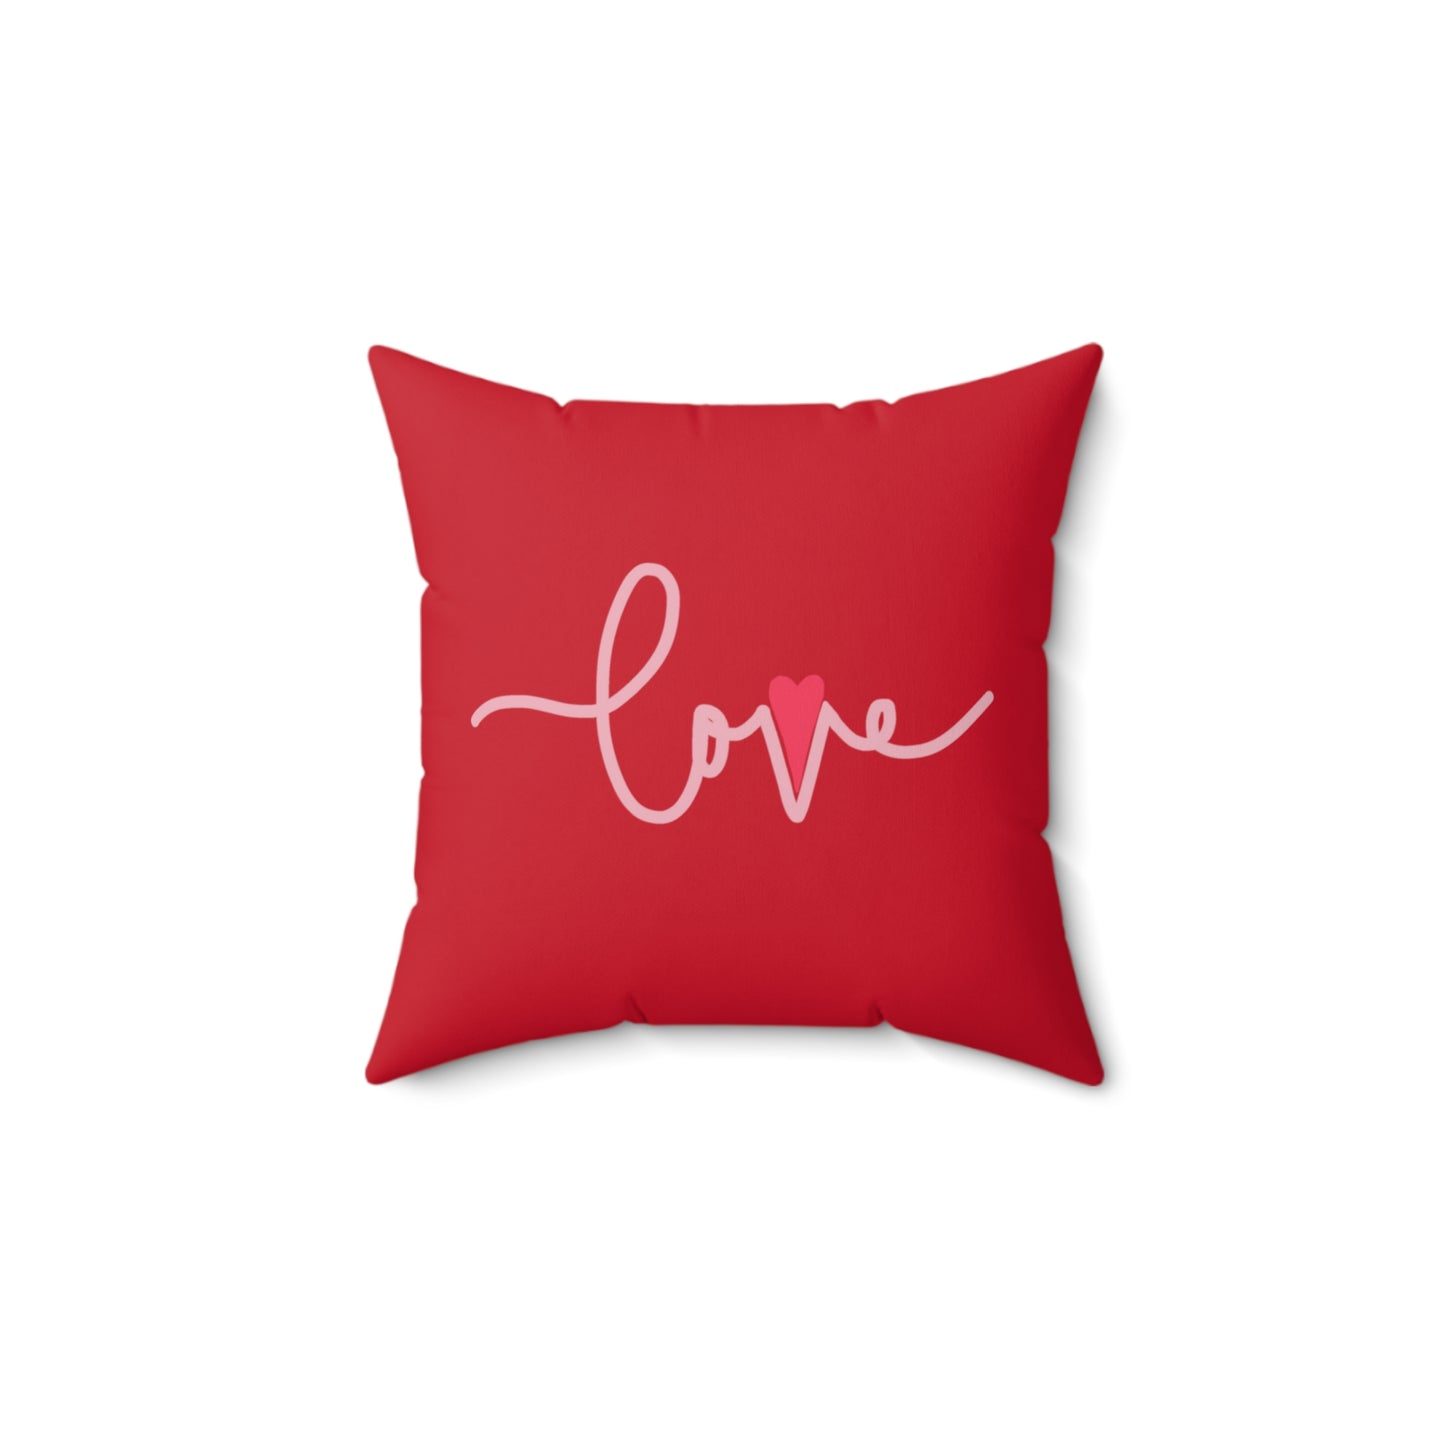 Red Heart Pillow / Valentine's Day Pillow